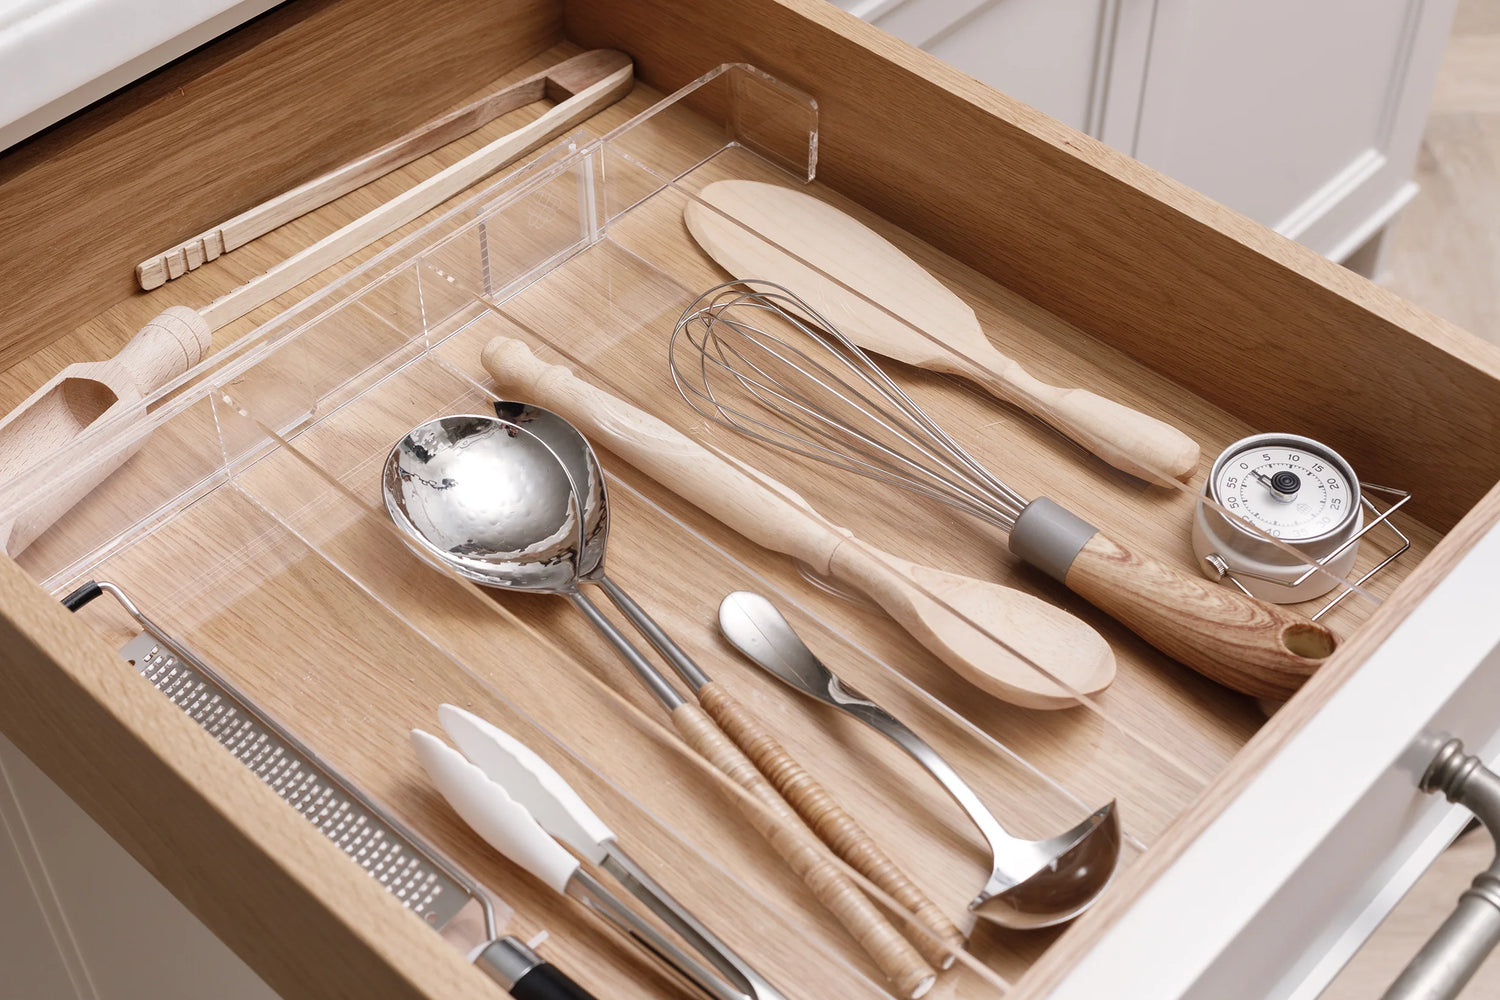 Crystal clear acrylic Expandable Kitchen Drawer Organizer separating wood and metal utensils.